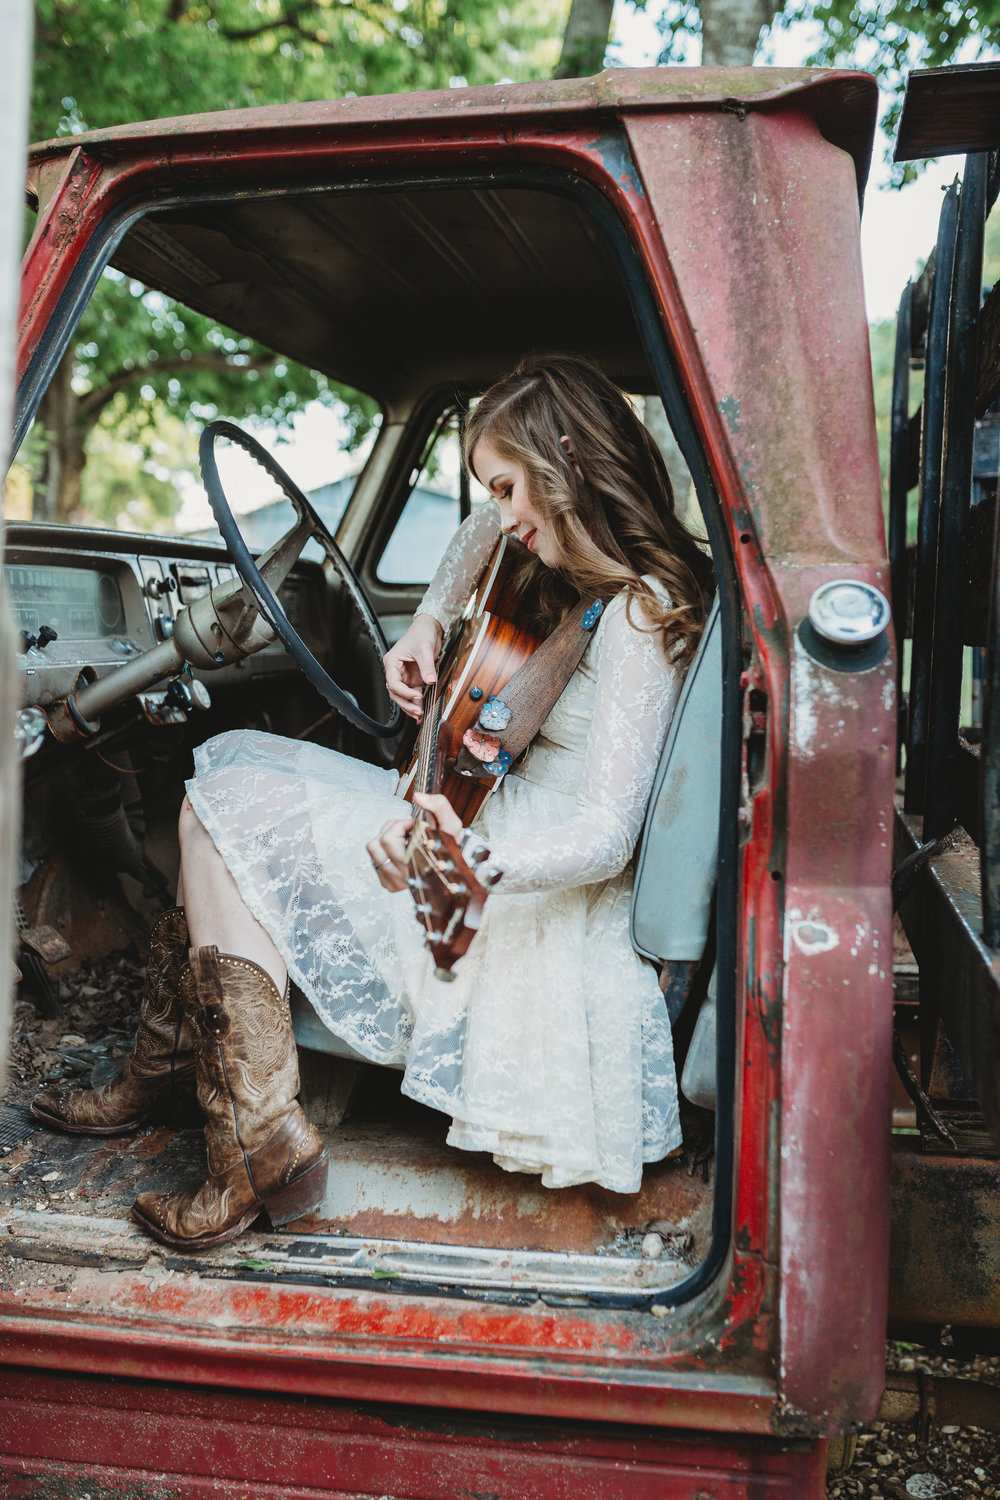 Austin recording artist Bethany Becker is the opening act Saturday during the annual Craft Beer and Wine Festival. Bethany is set to perform at 2 p.m.